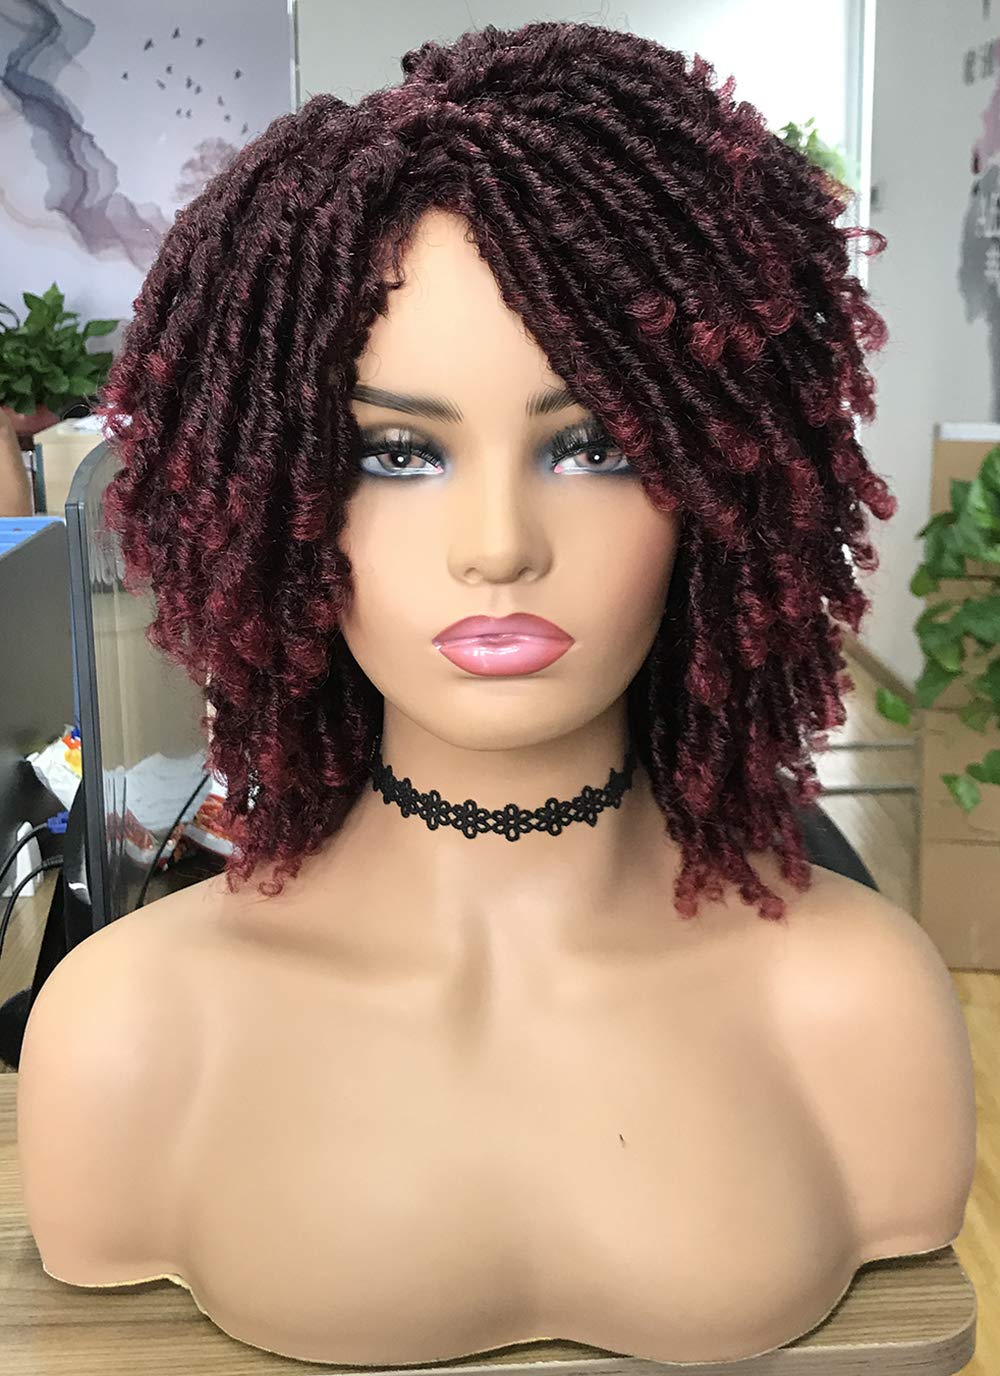 Price:$27.99     Lizzy Short Dreadlock Wig Twist Wigs for Black Women Short Curly Wig Synthetic Braided Faux Locs Crochet Hair Afro Wigs (Color  1B/99j)   Beauty